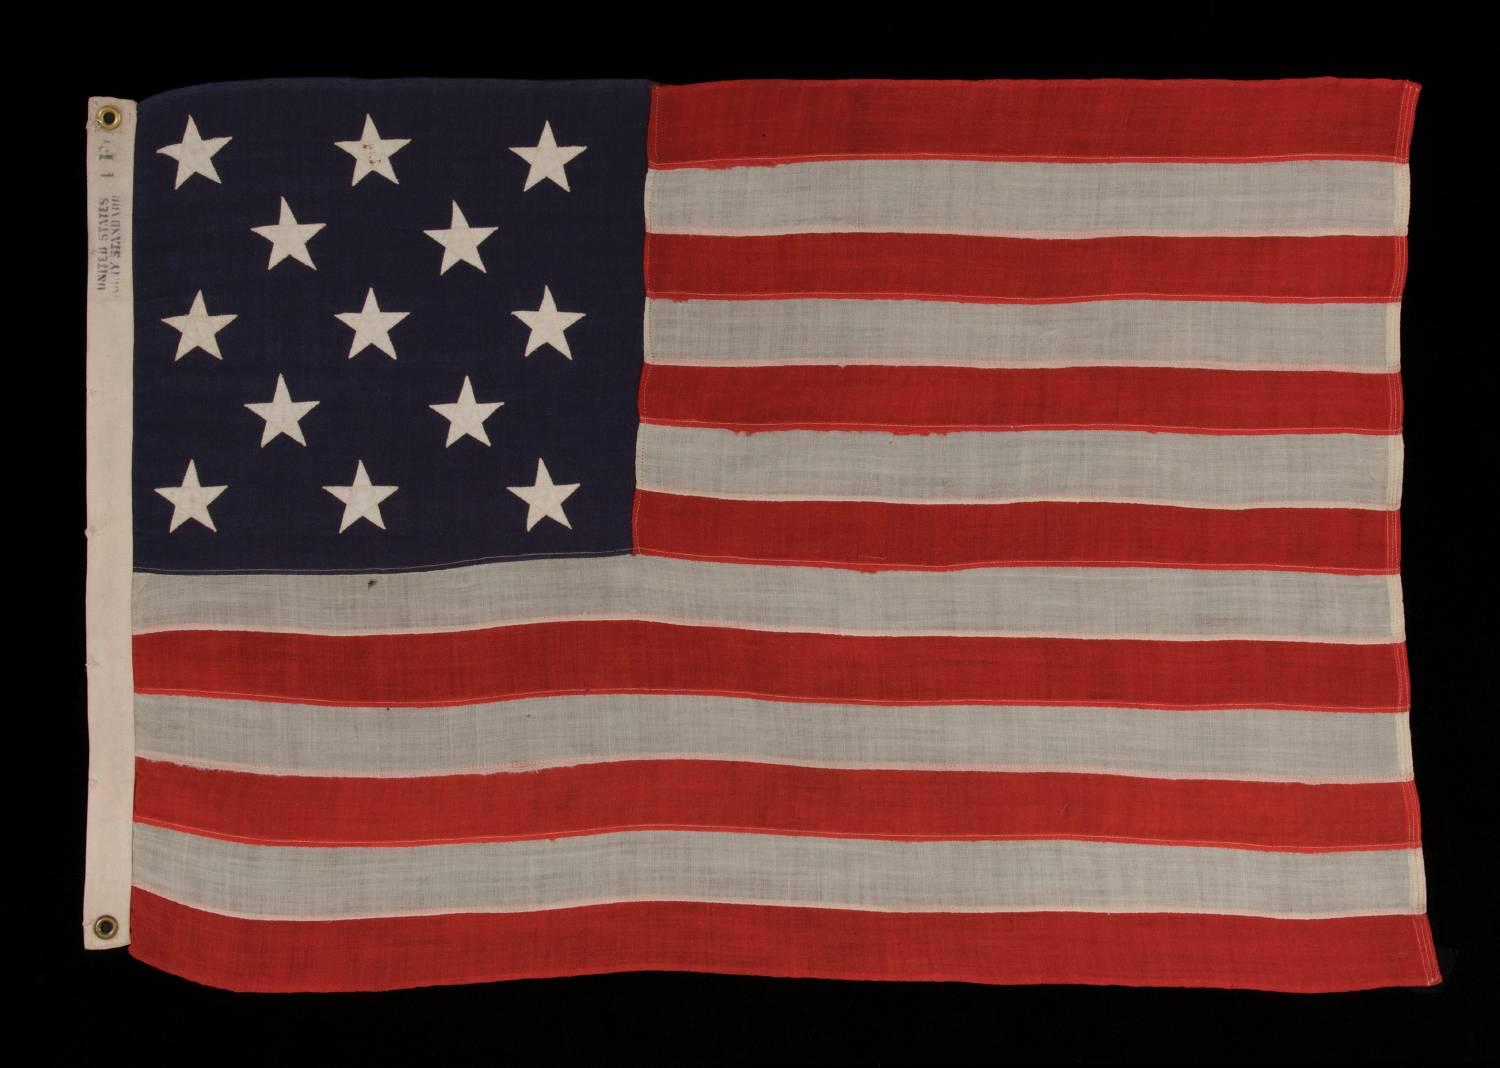 13 stars arranged in a 3-2-3-2-3 pattern on a small-scale antique american flag marked 